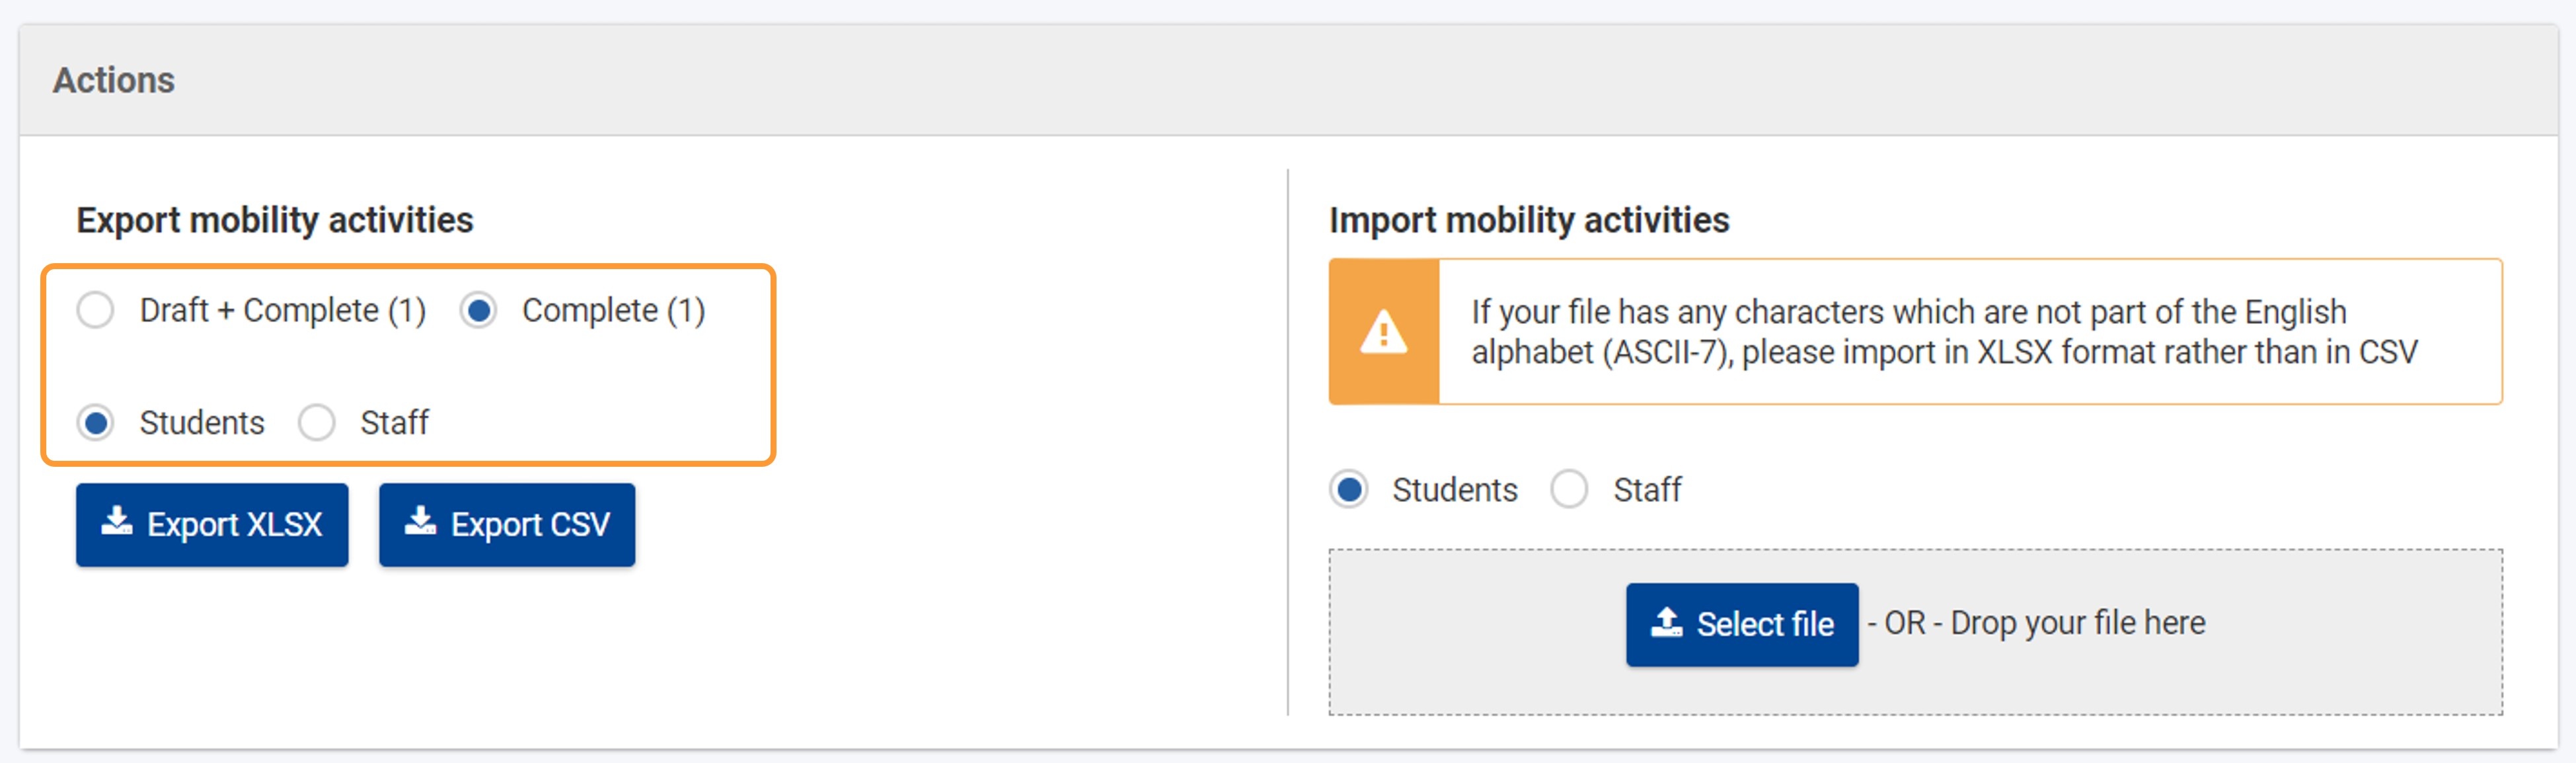 Select the type of mobility activities to export